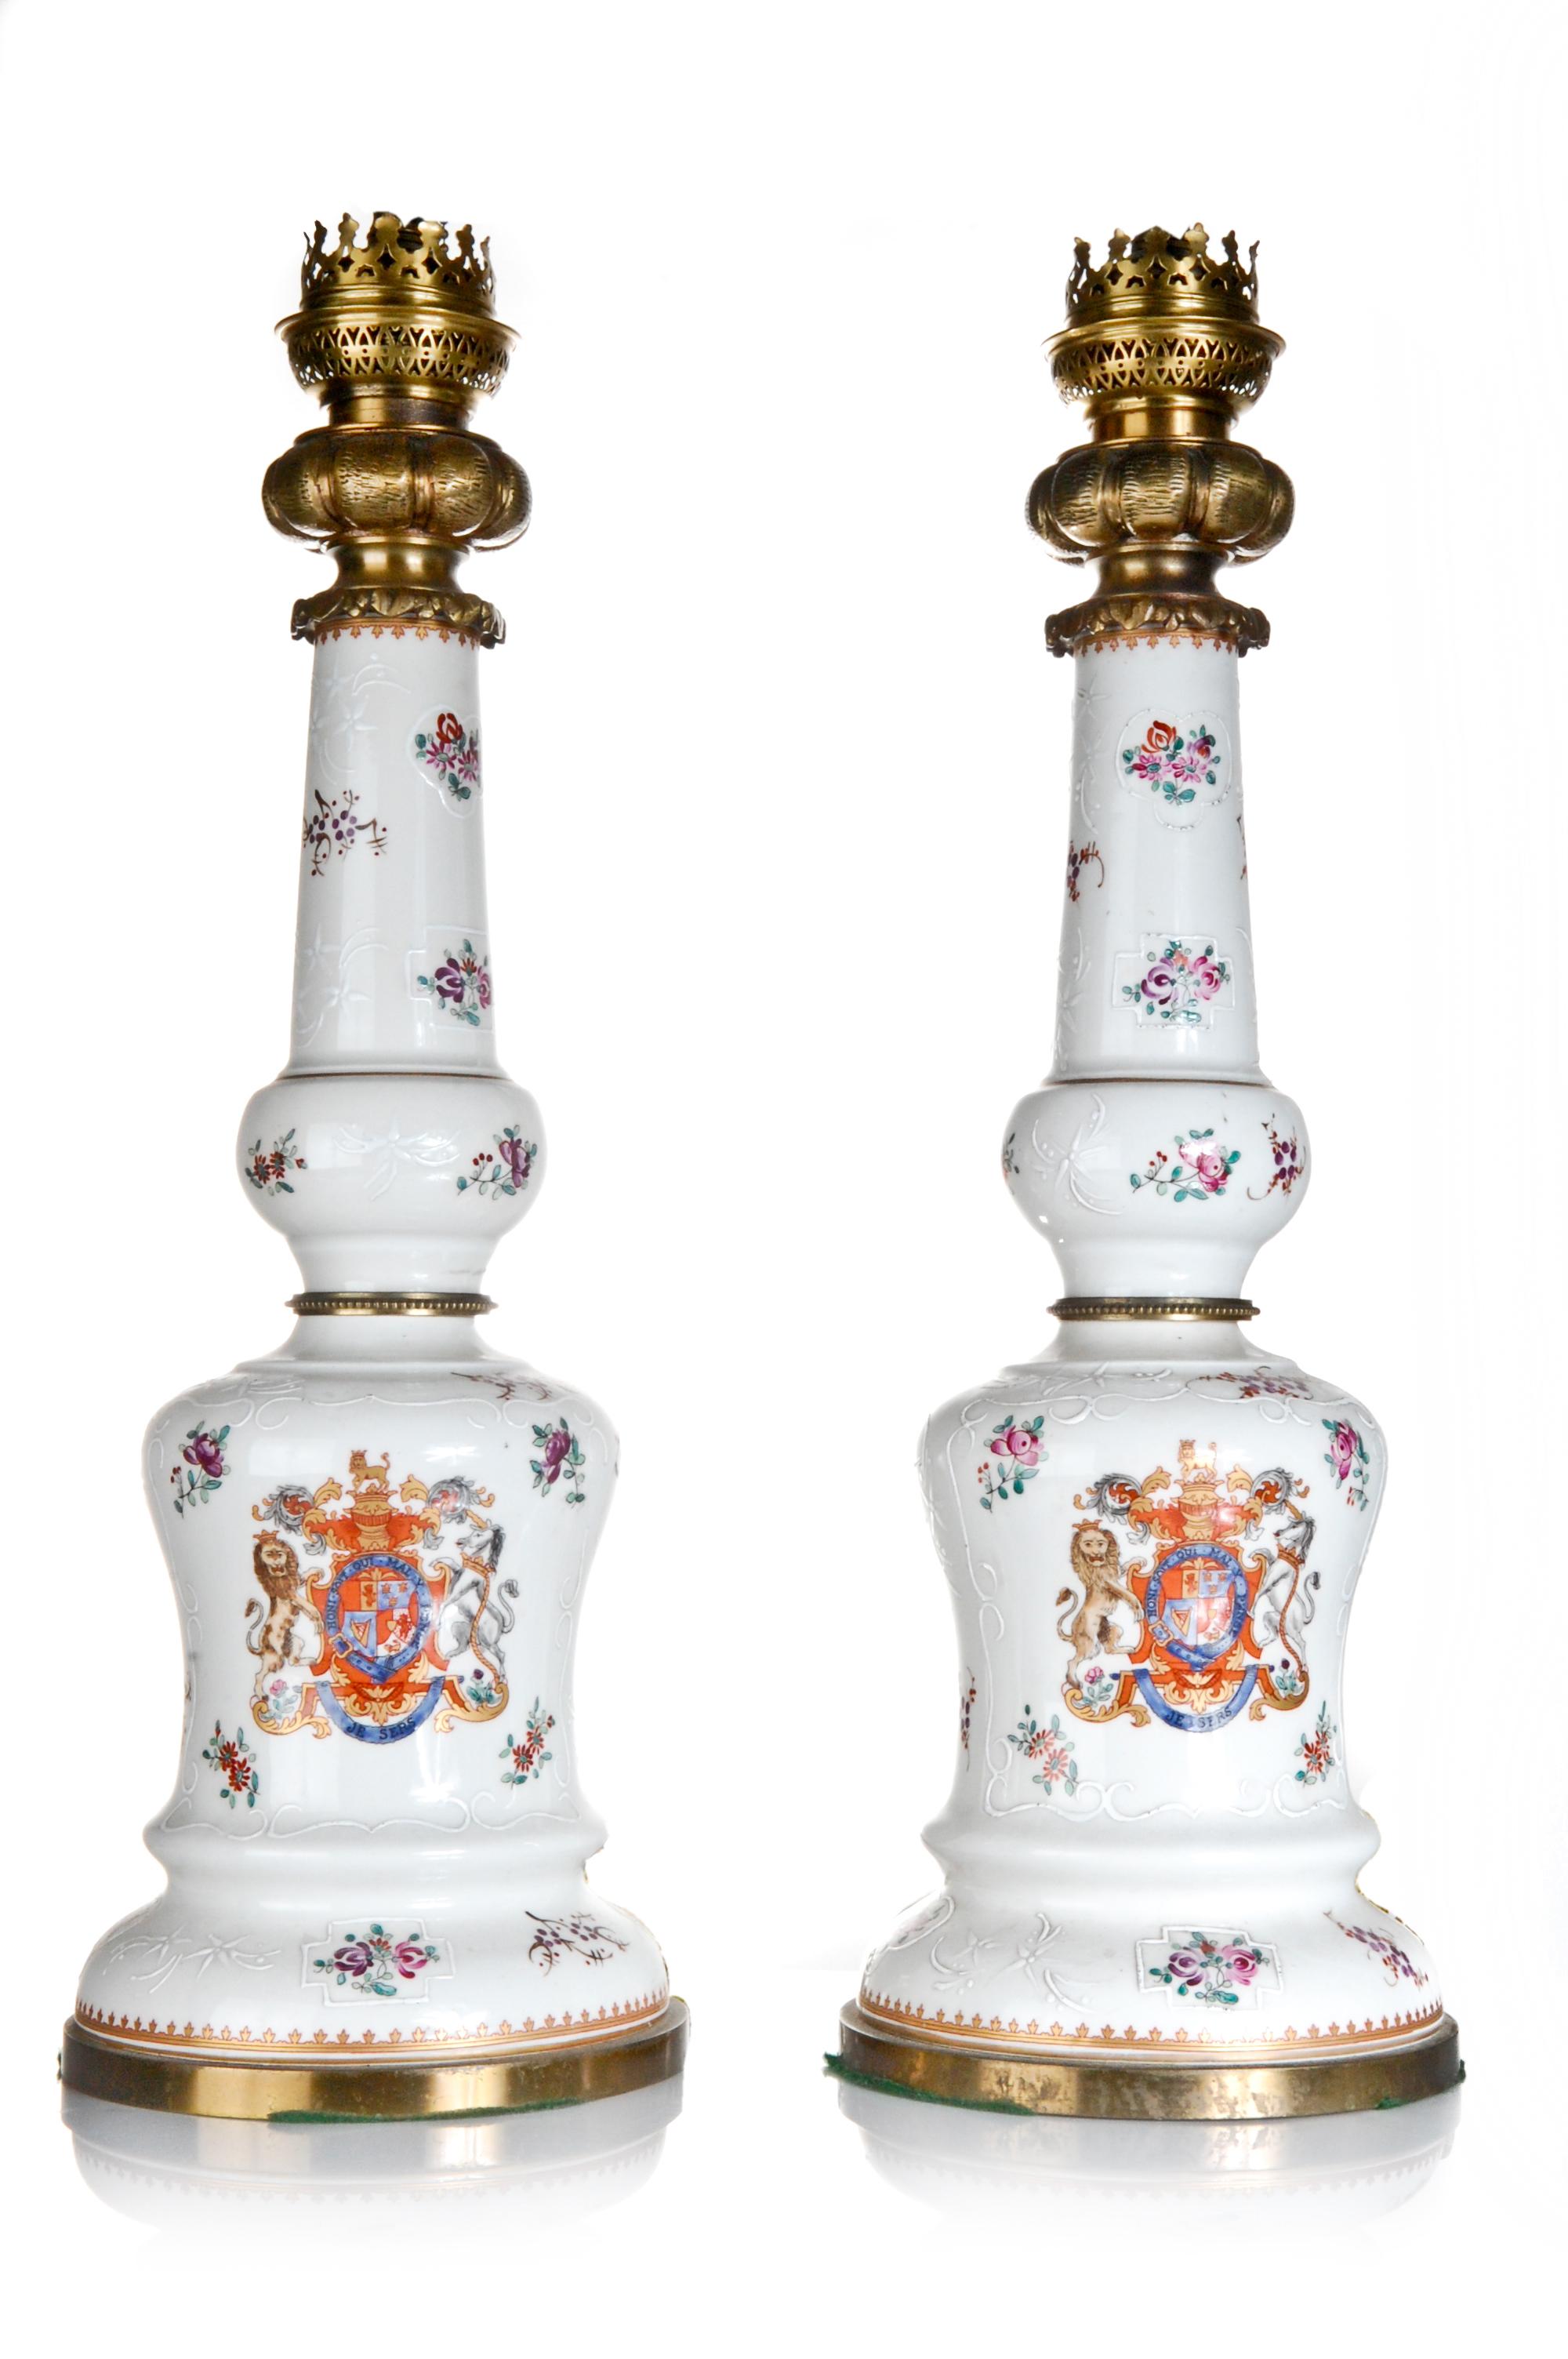 A Pair of Antique French Louis XVI Style Gilt Bronze mounted Samson Hand Painted Polychrome enameled Porcelain lamps with armorial crest and flowers.